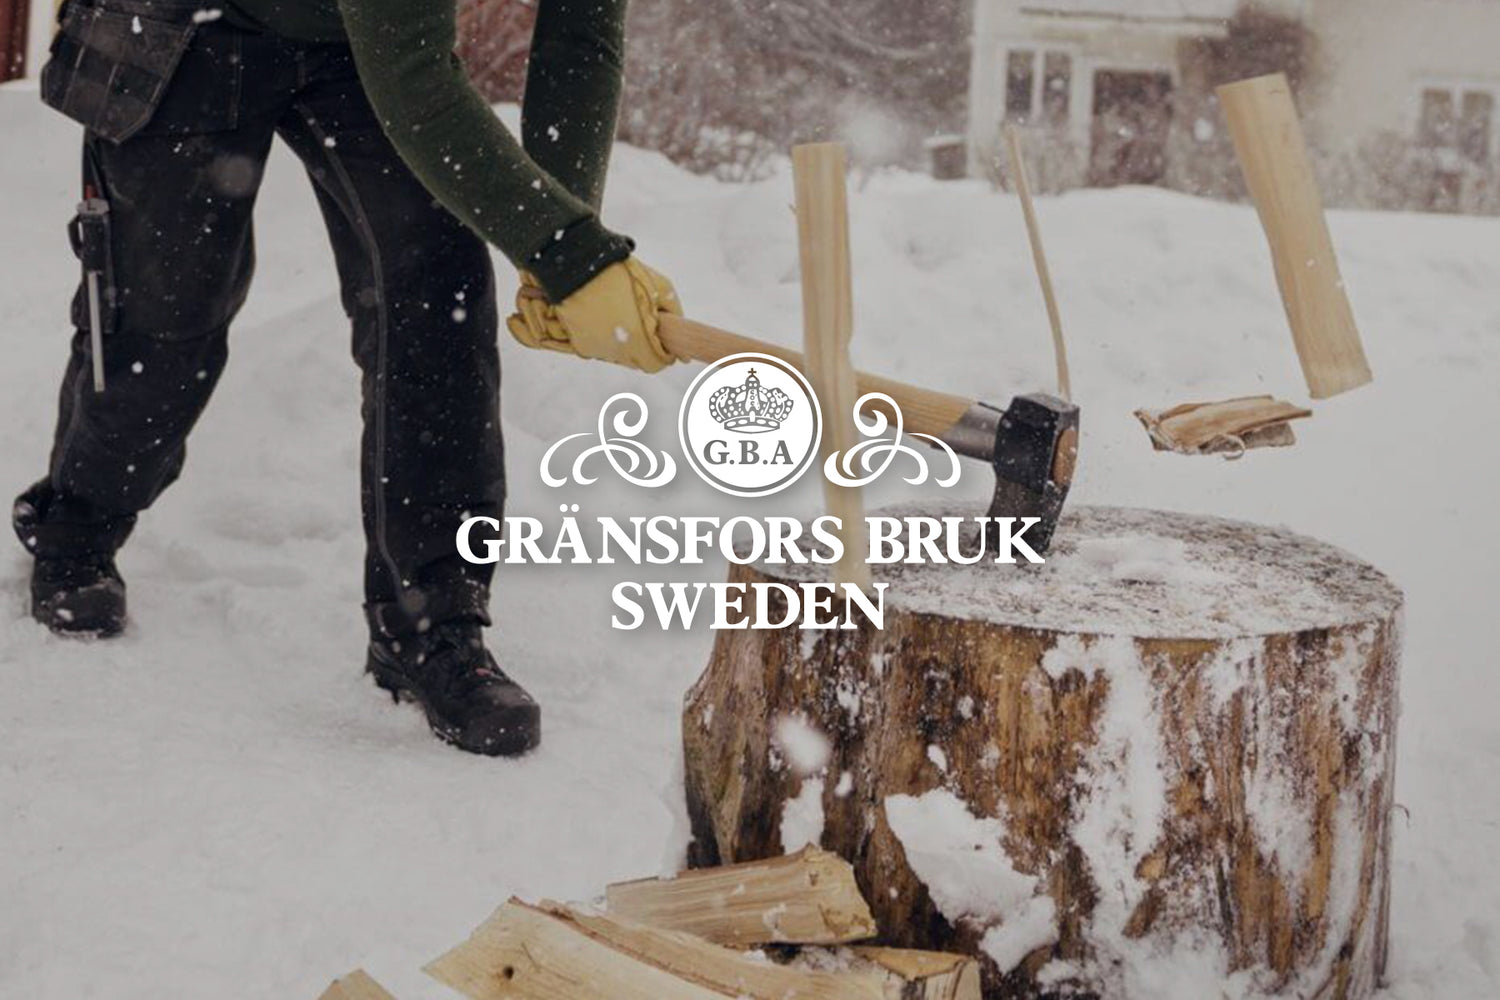 Gransfors Bruk Sweden logo on top of man chopping wood with axe